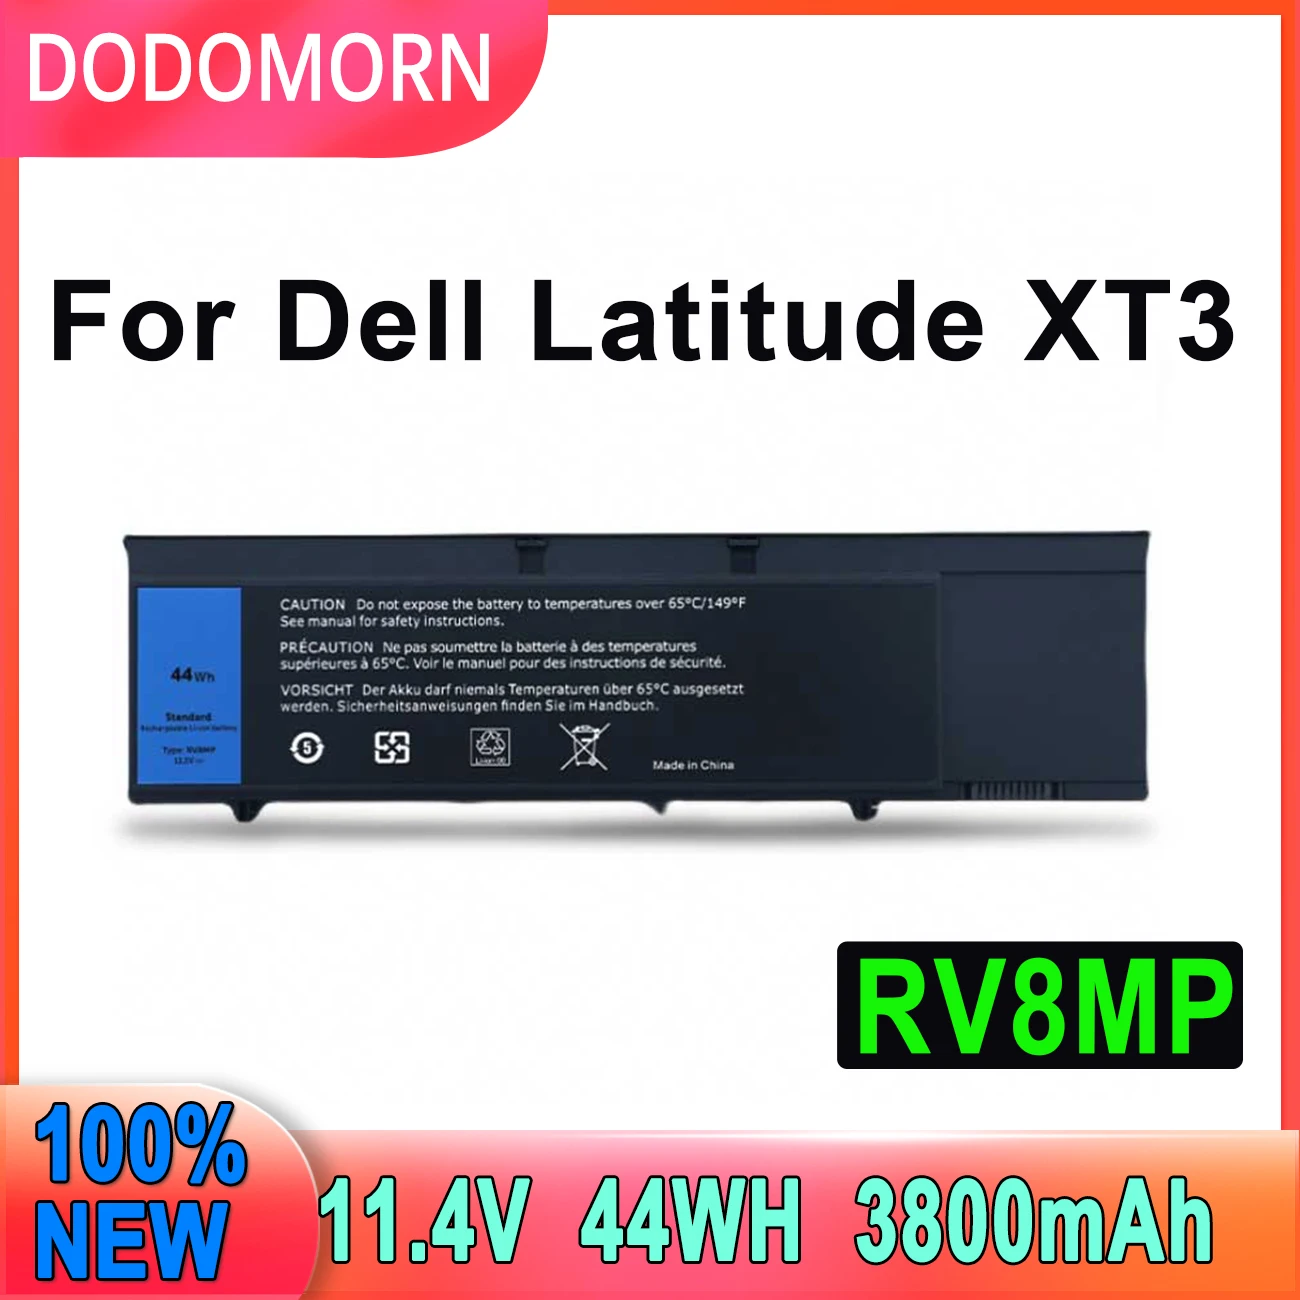 

New Laptop Battery RV8MP For Dell Latitude XT3 Tablet PC H6T9R 1NP0F 37HGH 11.4V 44WH 3800mAh